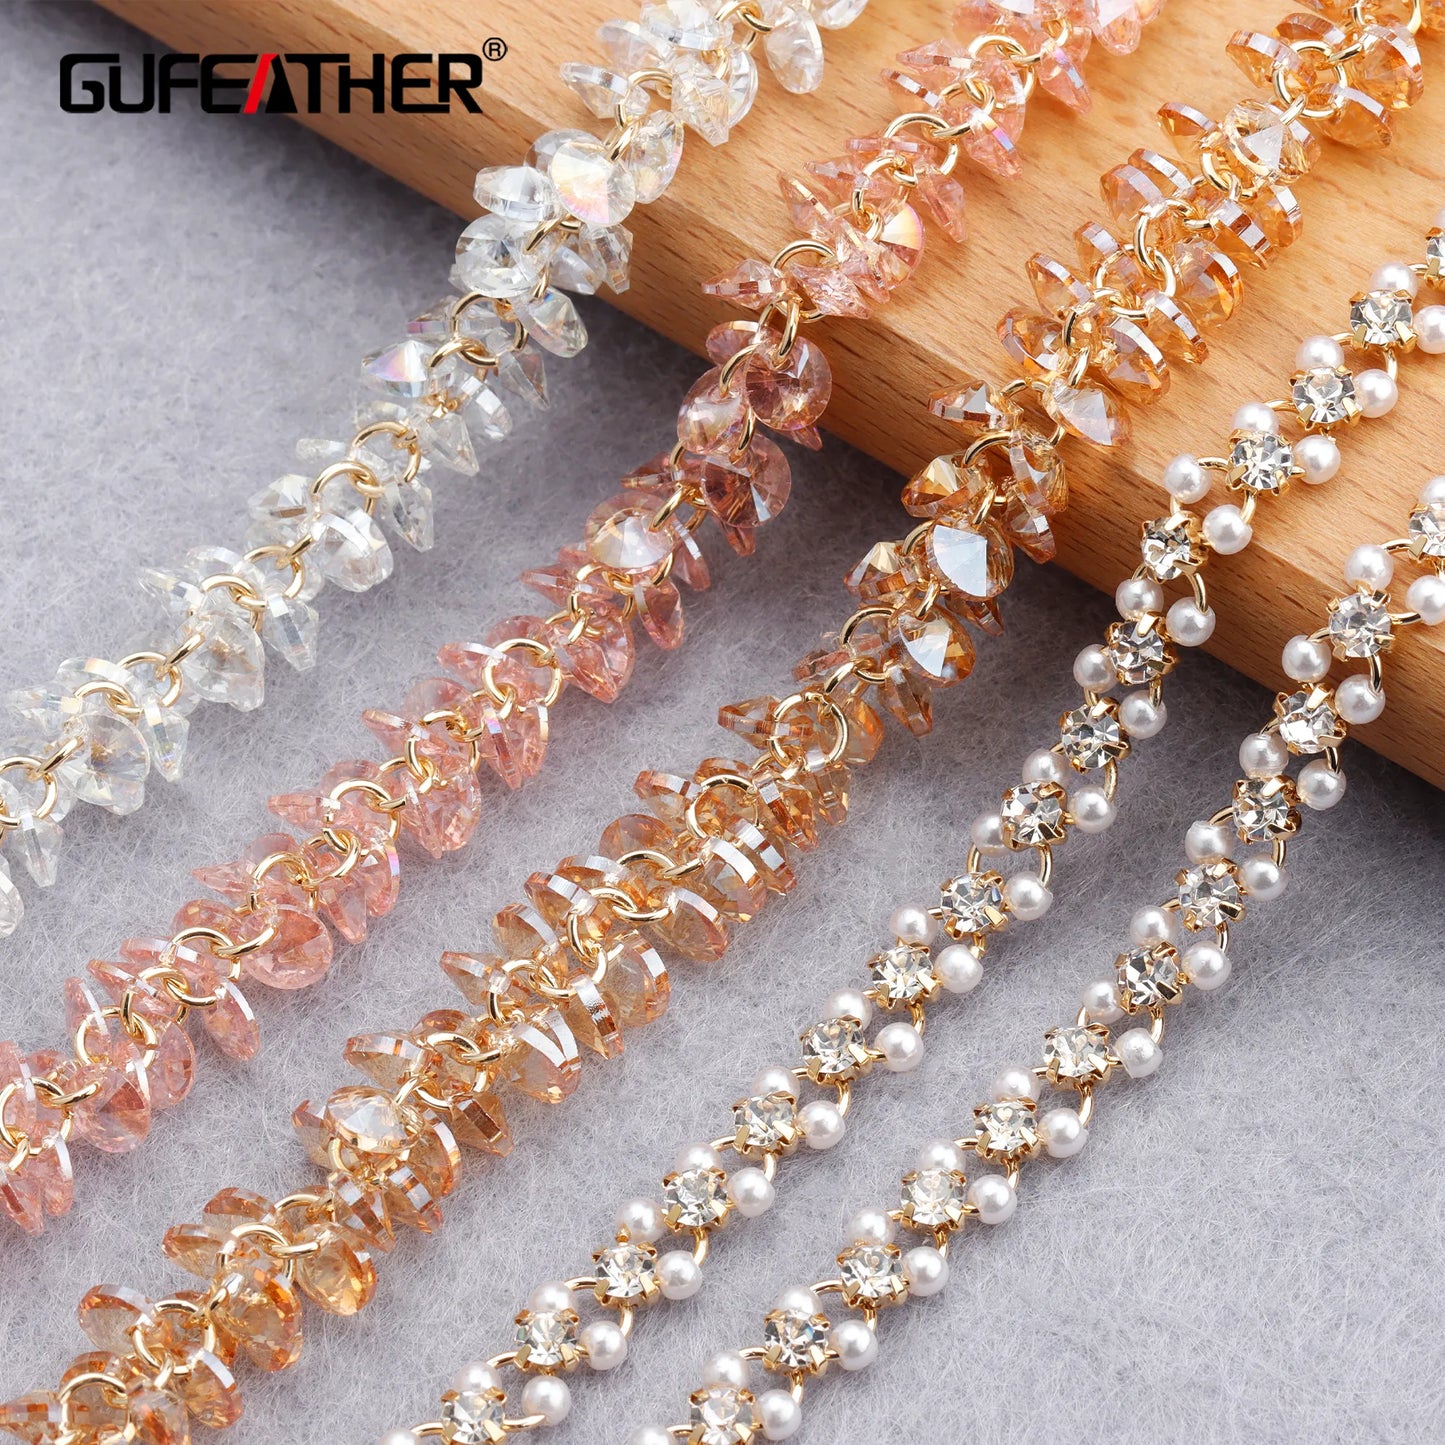 GUFEATHER C158,diy crystal chain,pass REACH,nickel free,18k gold plated,copper,charm,diy bracelet necklace,jewelry making,1m/lot